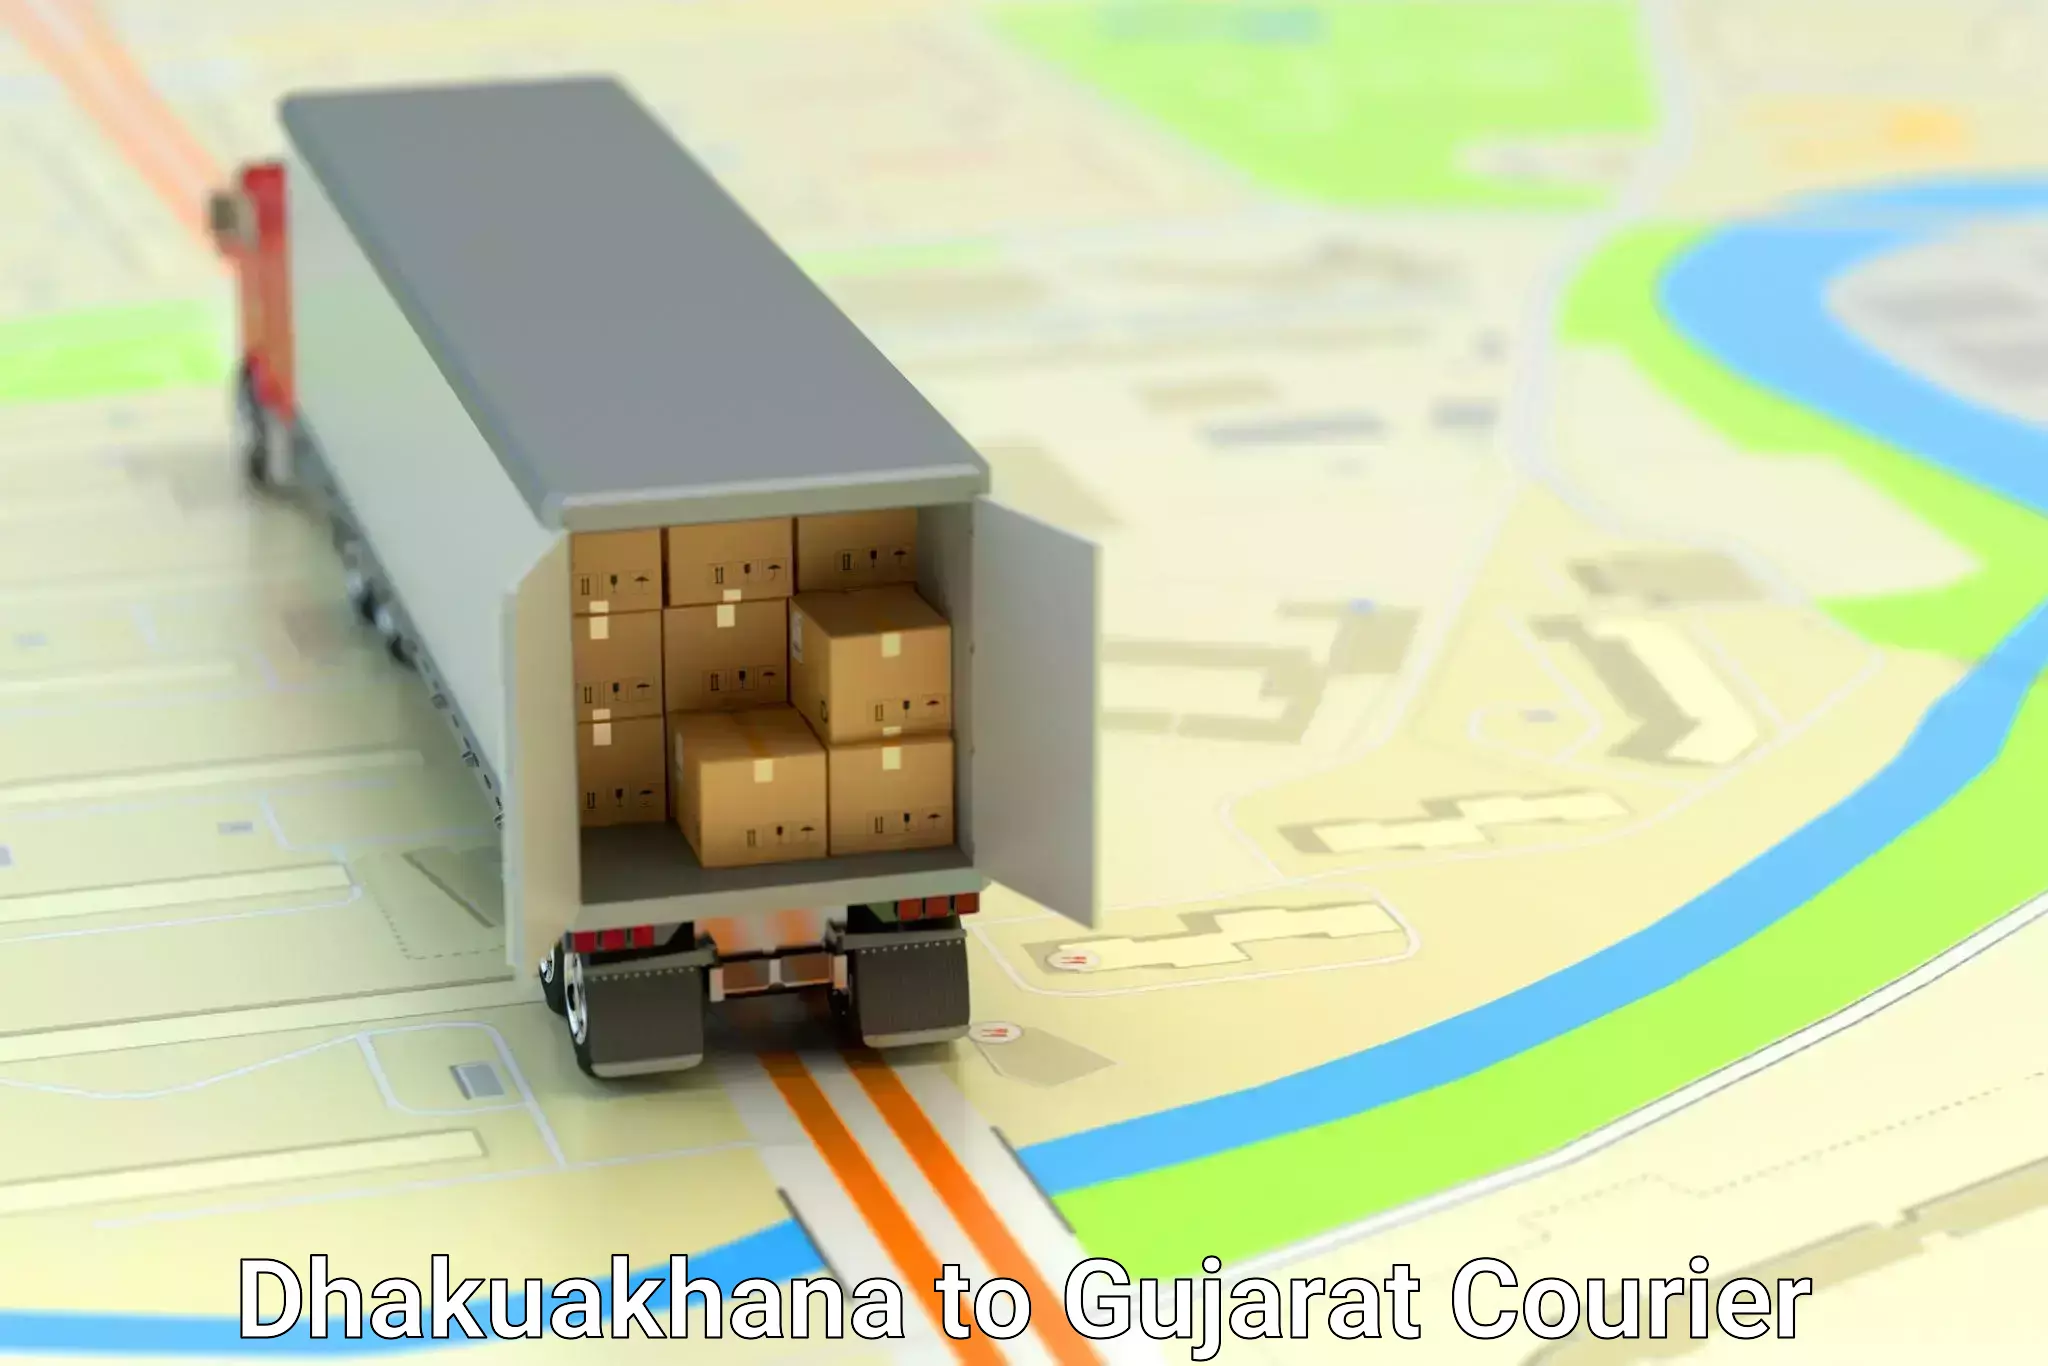 State-of-the-art courier technology Dhakuakhana to Gujarat